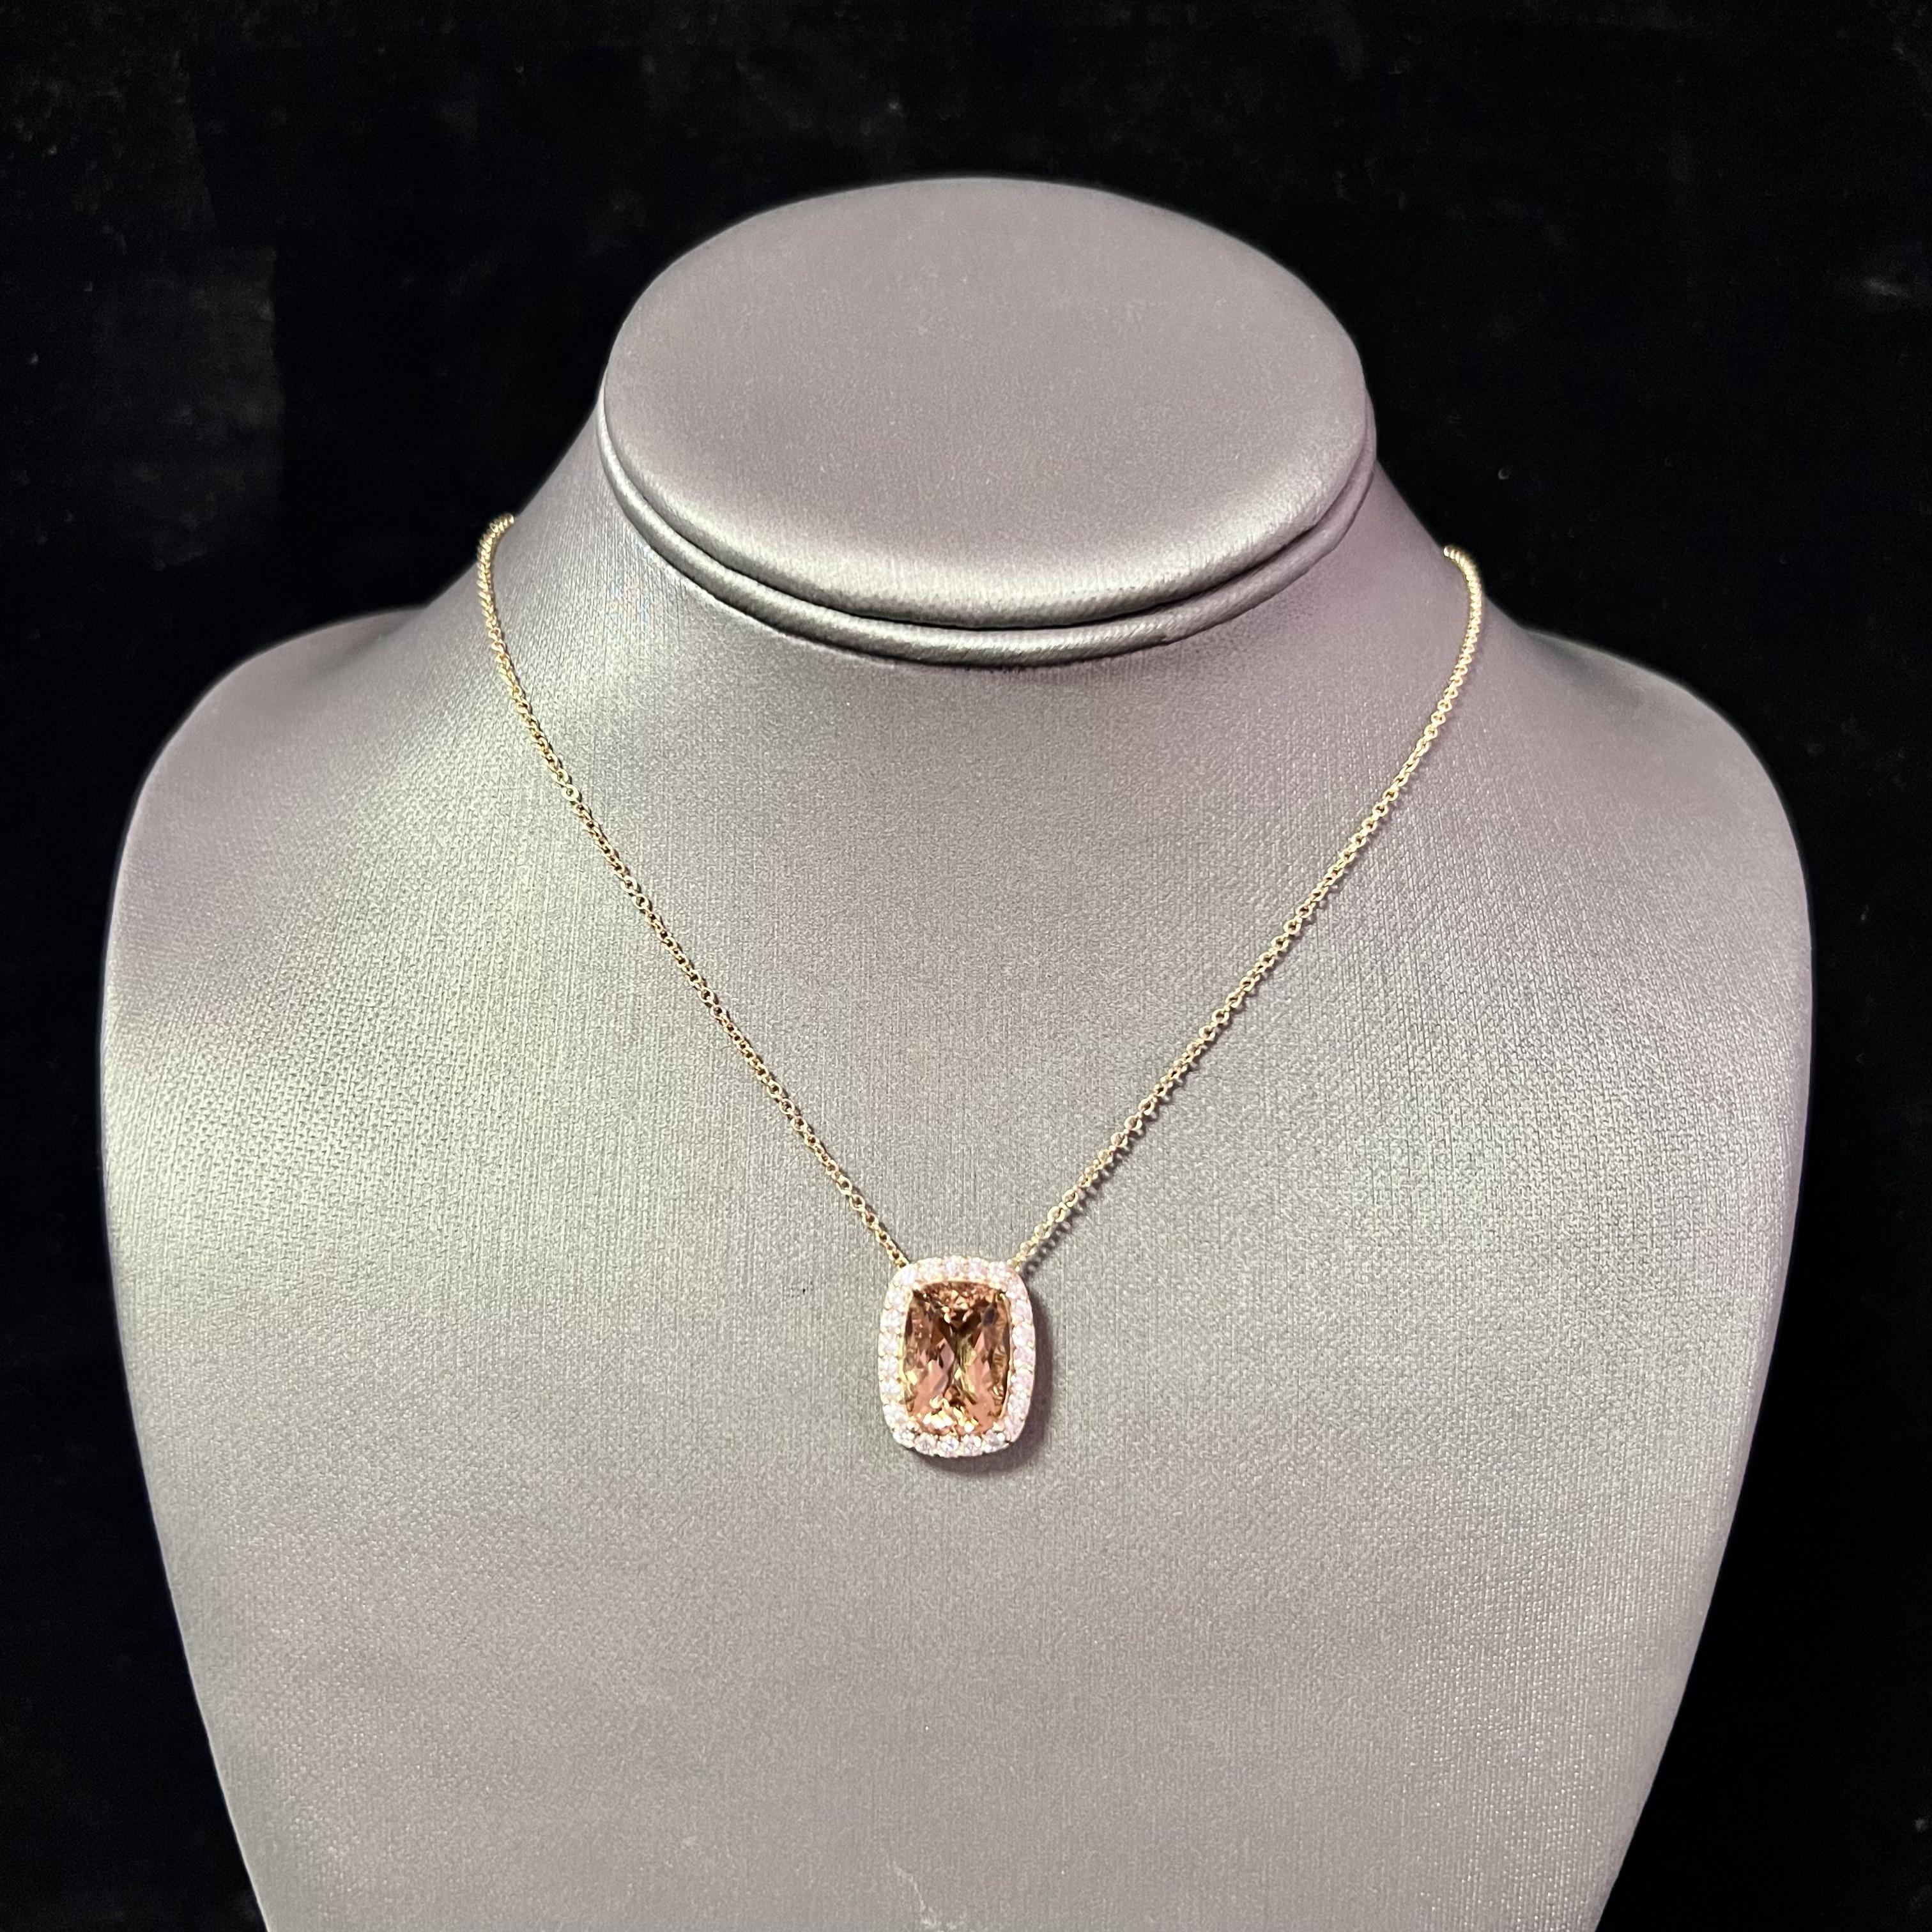 Natural Finely Faceted Quality Diamond Morganite Pendant Necklace 14k Gold 7.35 TCW Certified $5,950 213256

MADE IN ITALY!

This is a Unique Custom Made Glamorous Piece of Jewelry!

Nothing says, “I Love you” more than Diamonds and Pearls!

This